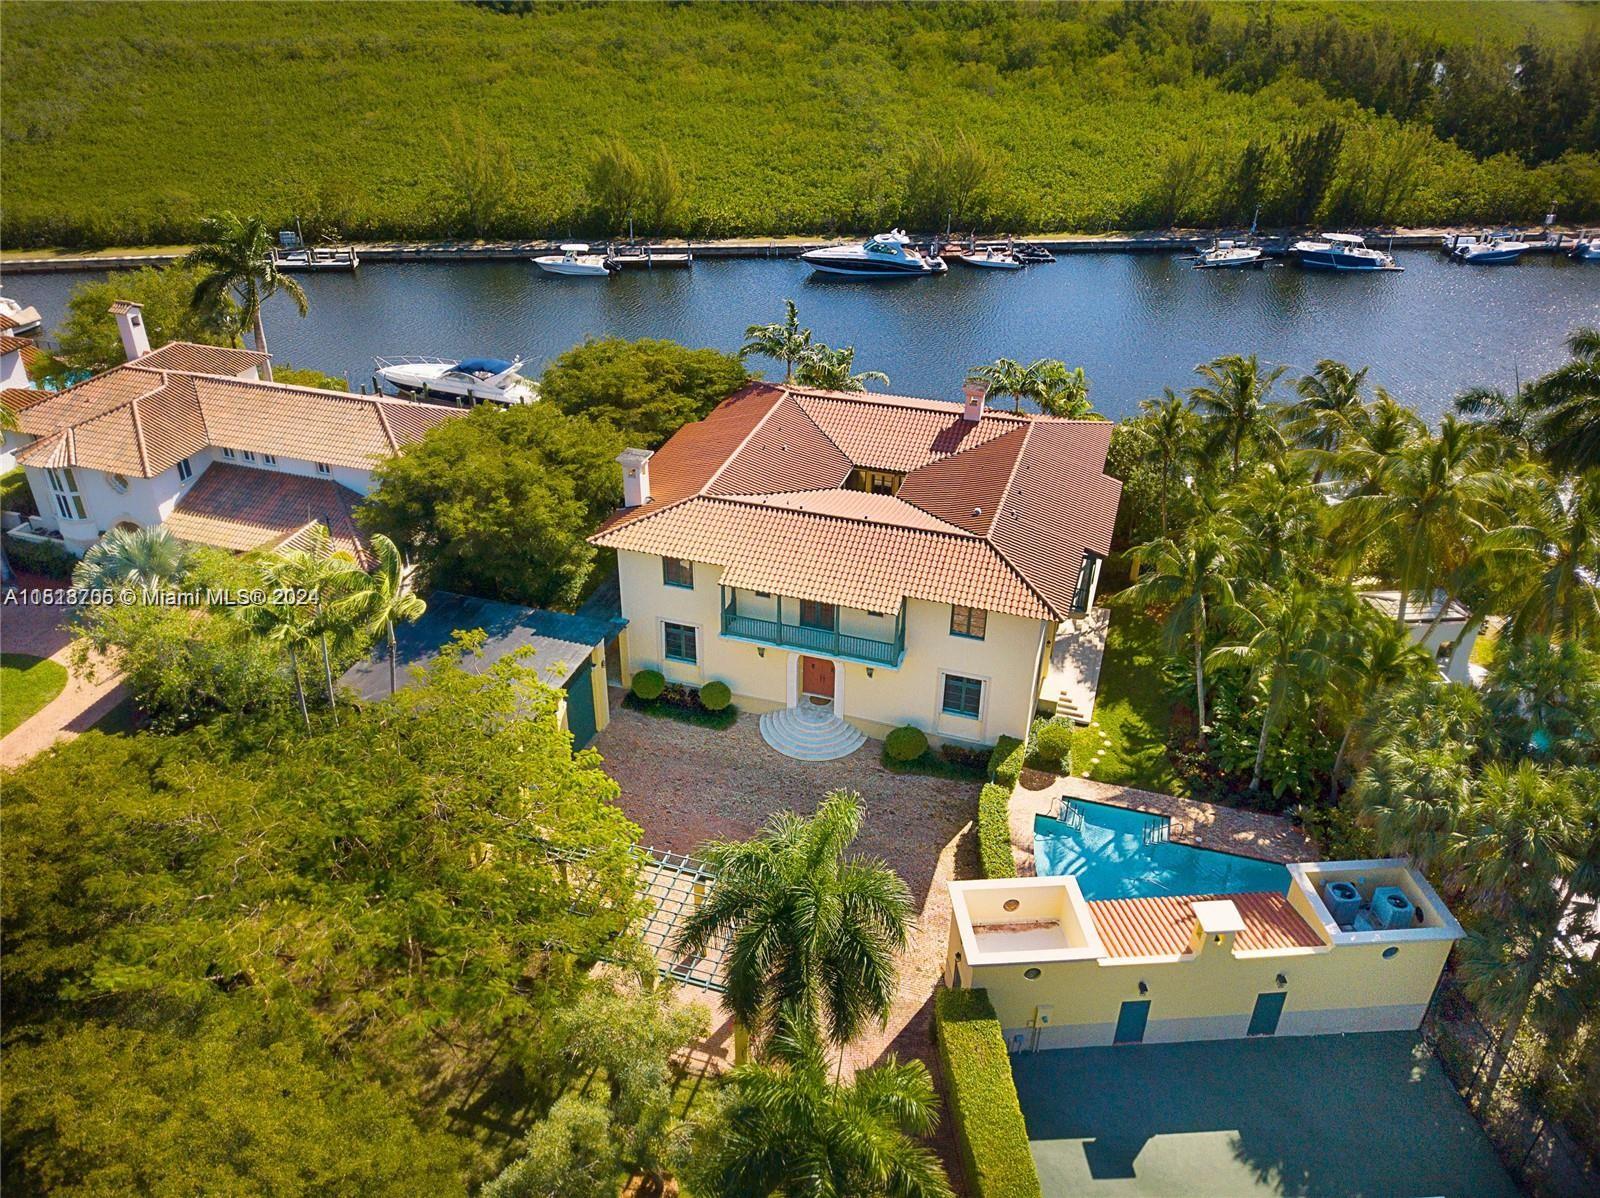 Waterfront Coral Gables gated estate with dock, serene unobstructed waterfront views, and professional tennis court on nearly one acre! This Portuondo Perotti designed home, in the quiet guard gated neighborhood of Hammock Oaks, is situated on a 40,000 SF lot with a ±7,000 SF home, 2 Spectacular Tree Houses! This beautiful home has 6 Bed/5.5 Bath (+2 Bonus Rms, Office, Gym Totaling 8 Rms), Living Room and master bedroom with fireplaces, beautiful Courtyard and a separate Barn Style Garage bringing exquisite style to this home!  Unobstructed Serene Waterfront Views, includes 12ft Ceilings, Italian Marble, Hardwood Floors , Pool, Cabana, only one bridge to Open Bay, 36’ Dock on Almost 100 Ft Linear Waterfront …. It’s a very Quick Seven Minute Drive to Open Bay!! Must See! Won’t Last!